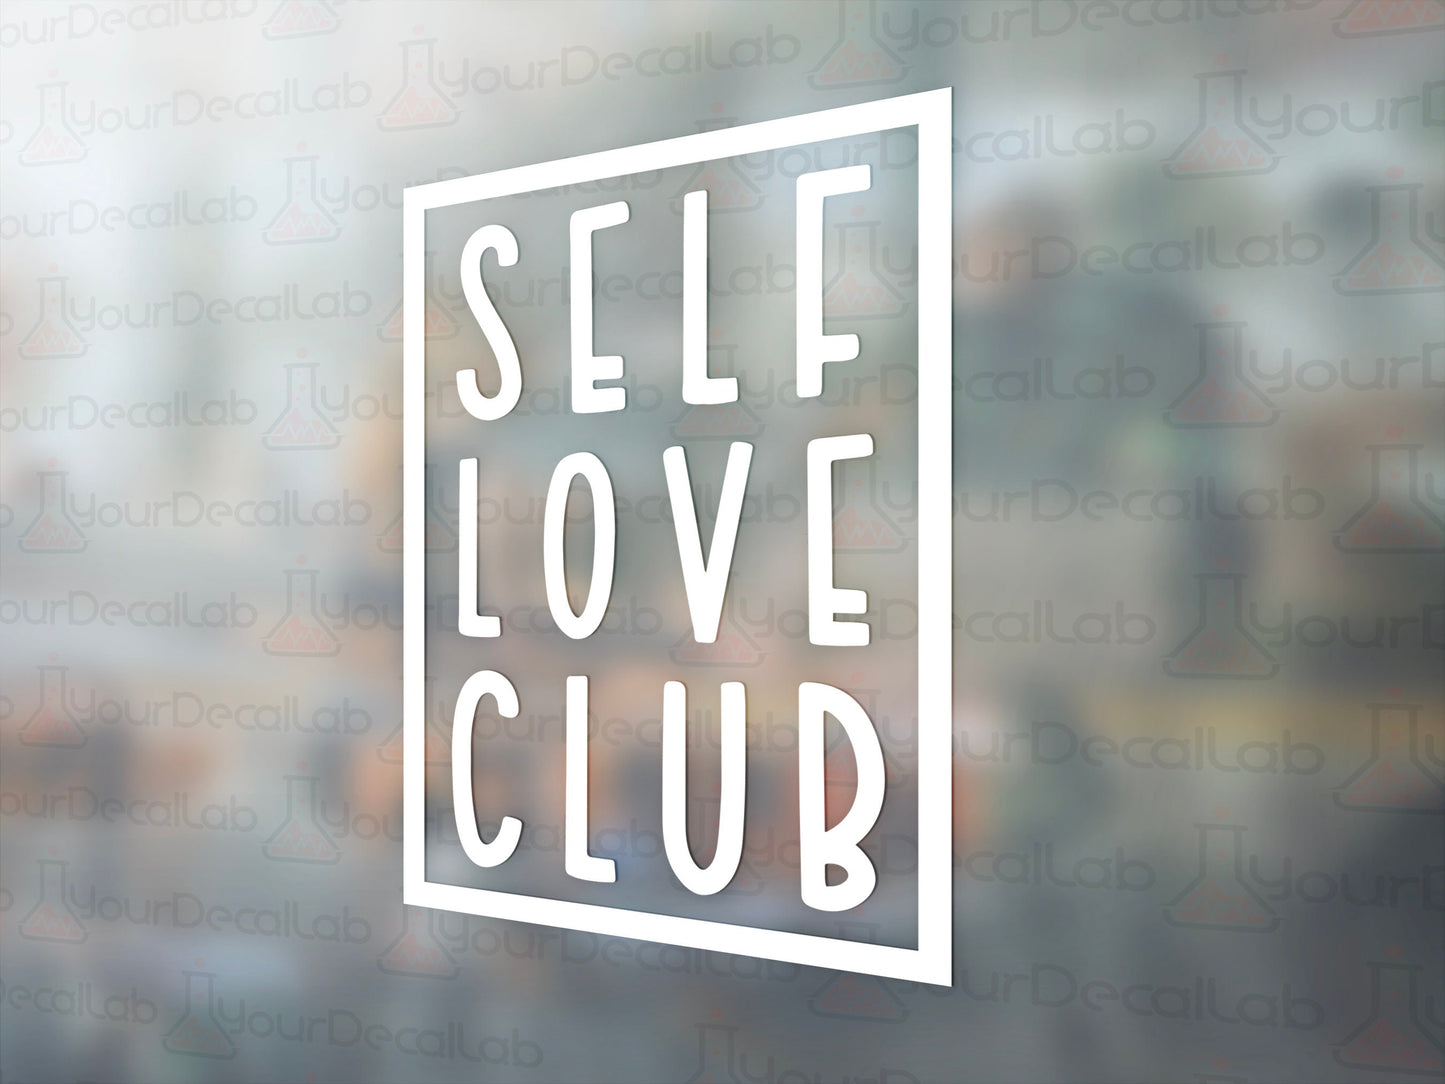 Self Love Club Decal - Many Colors & Sizes